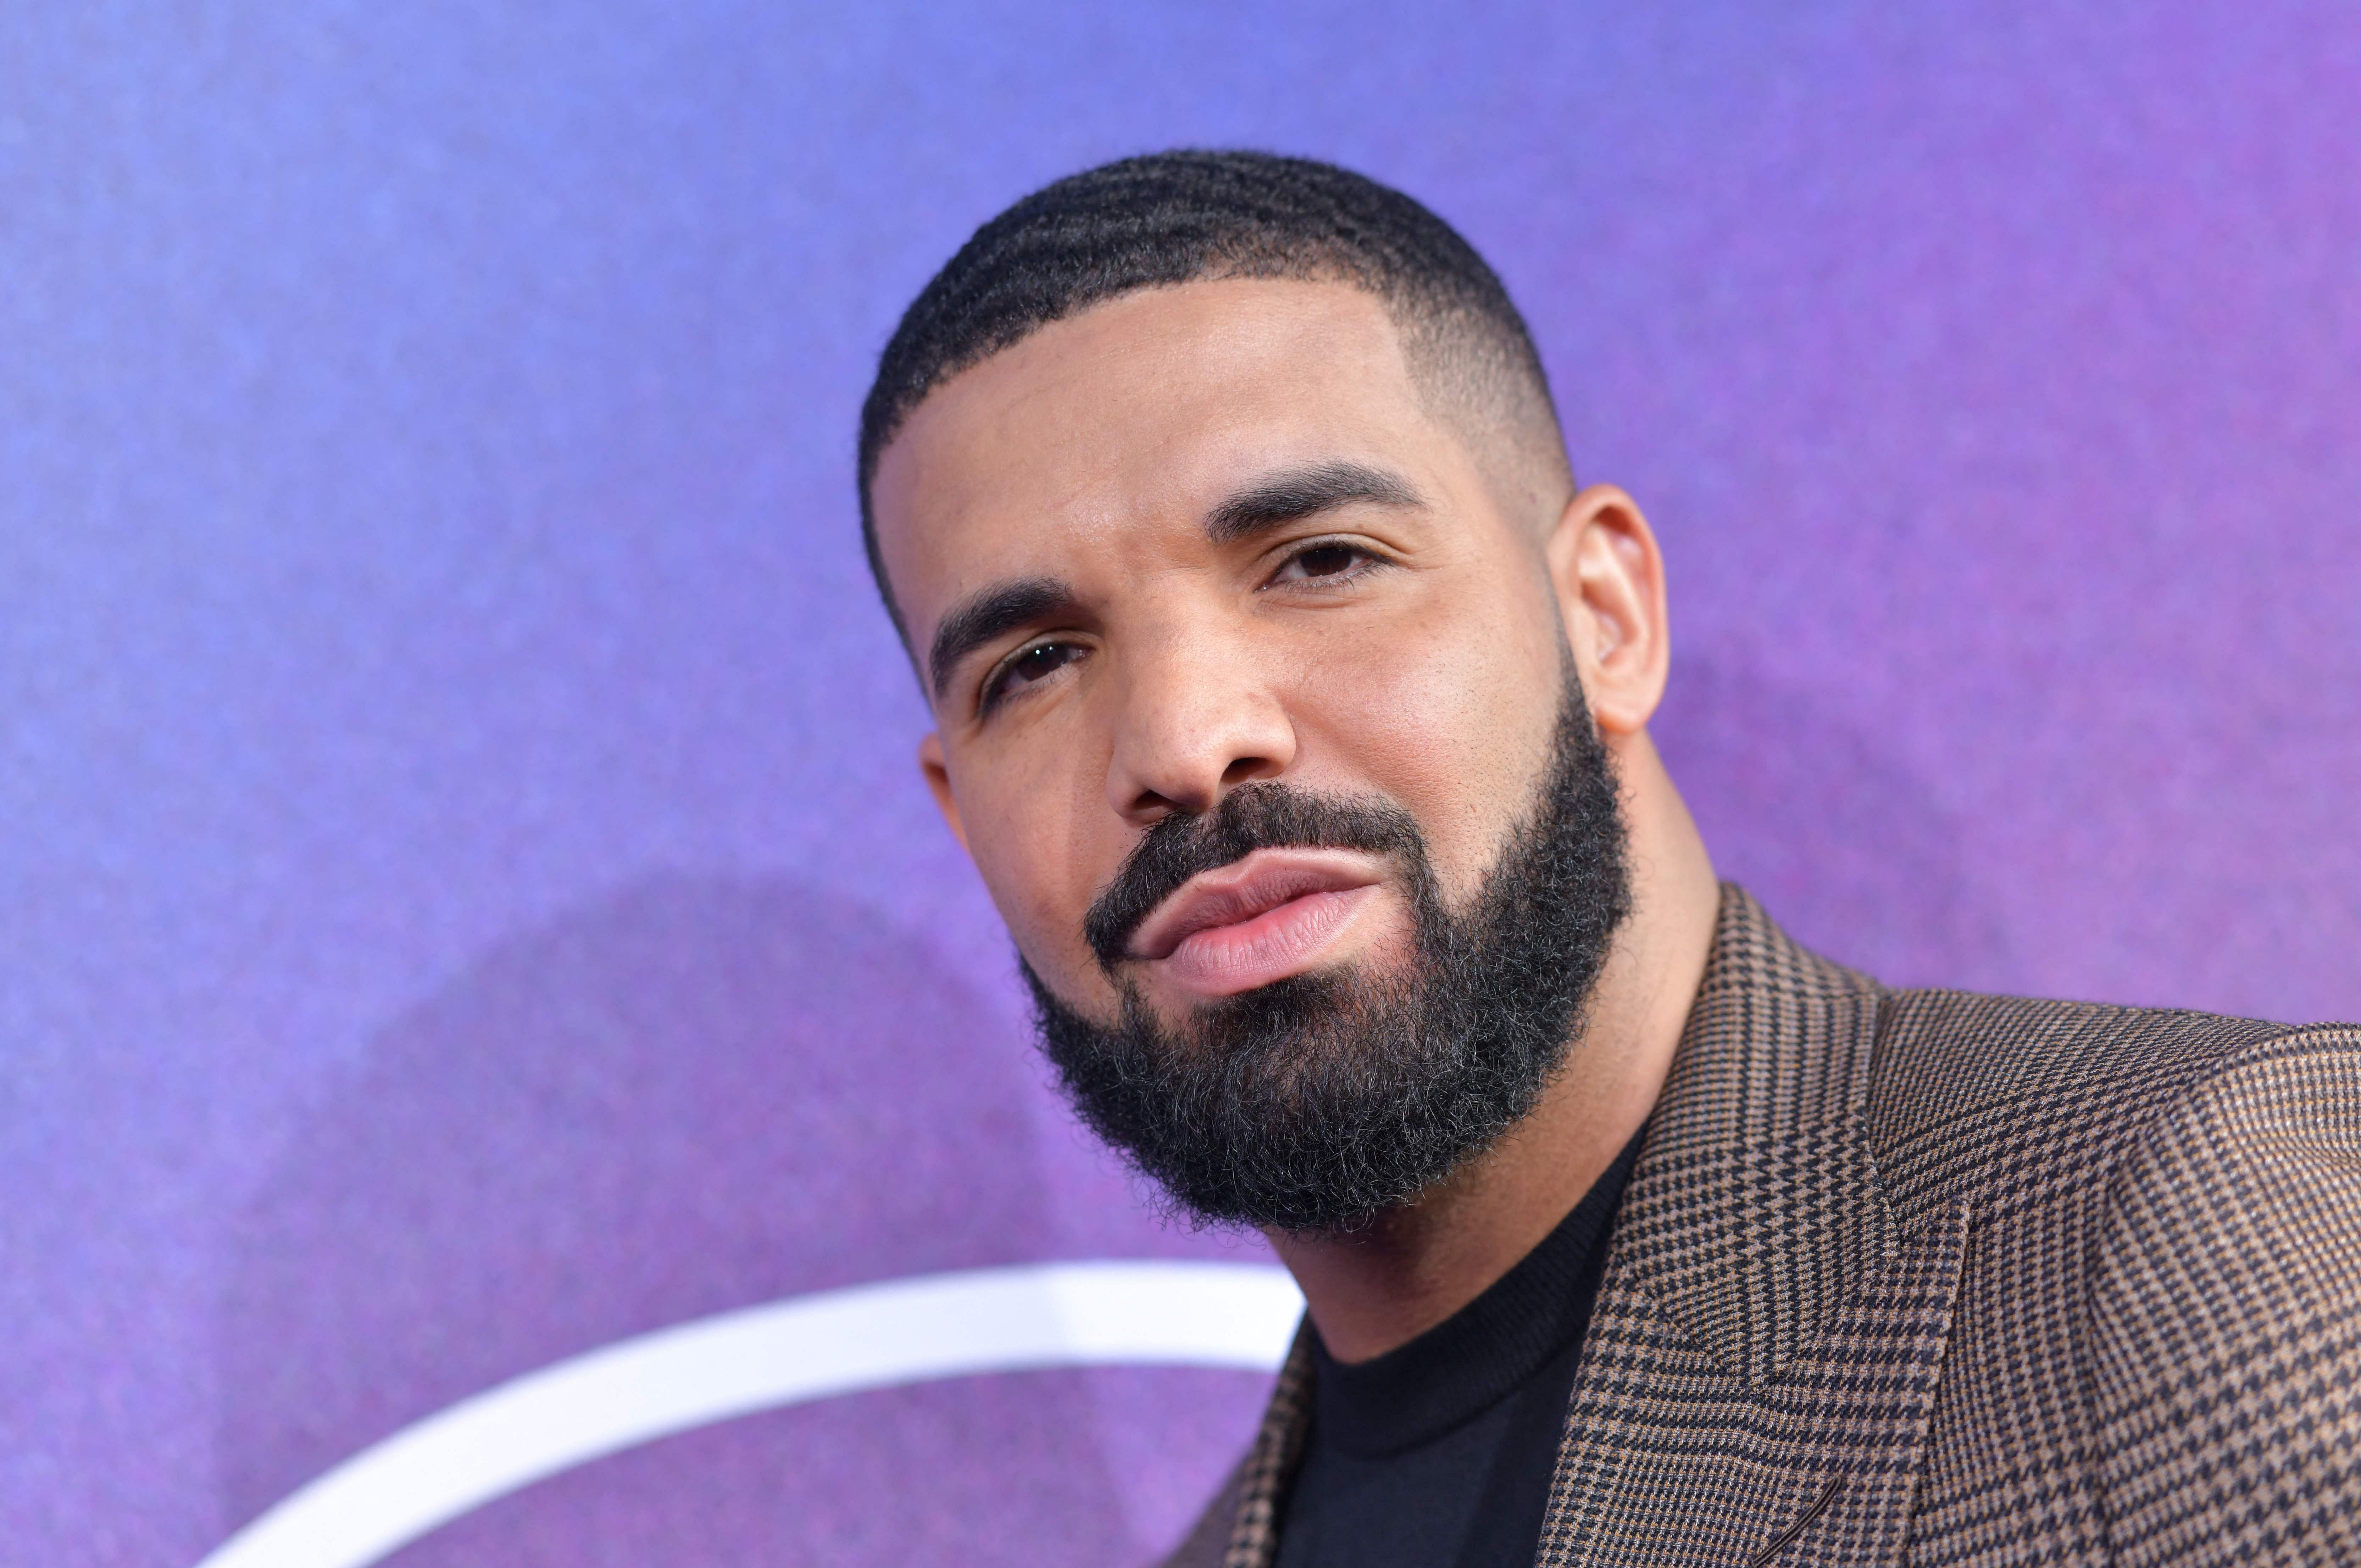 Drake is also up for seven awards at the 2021 ceremony, including the top artist trophy. Credit: AFP Photo